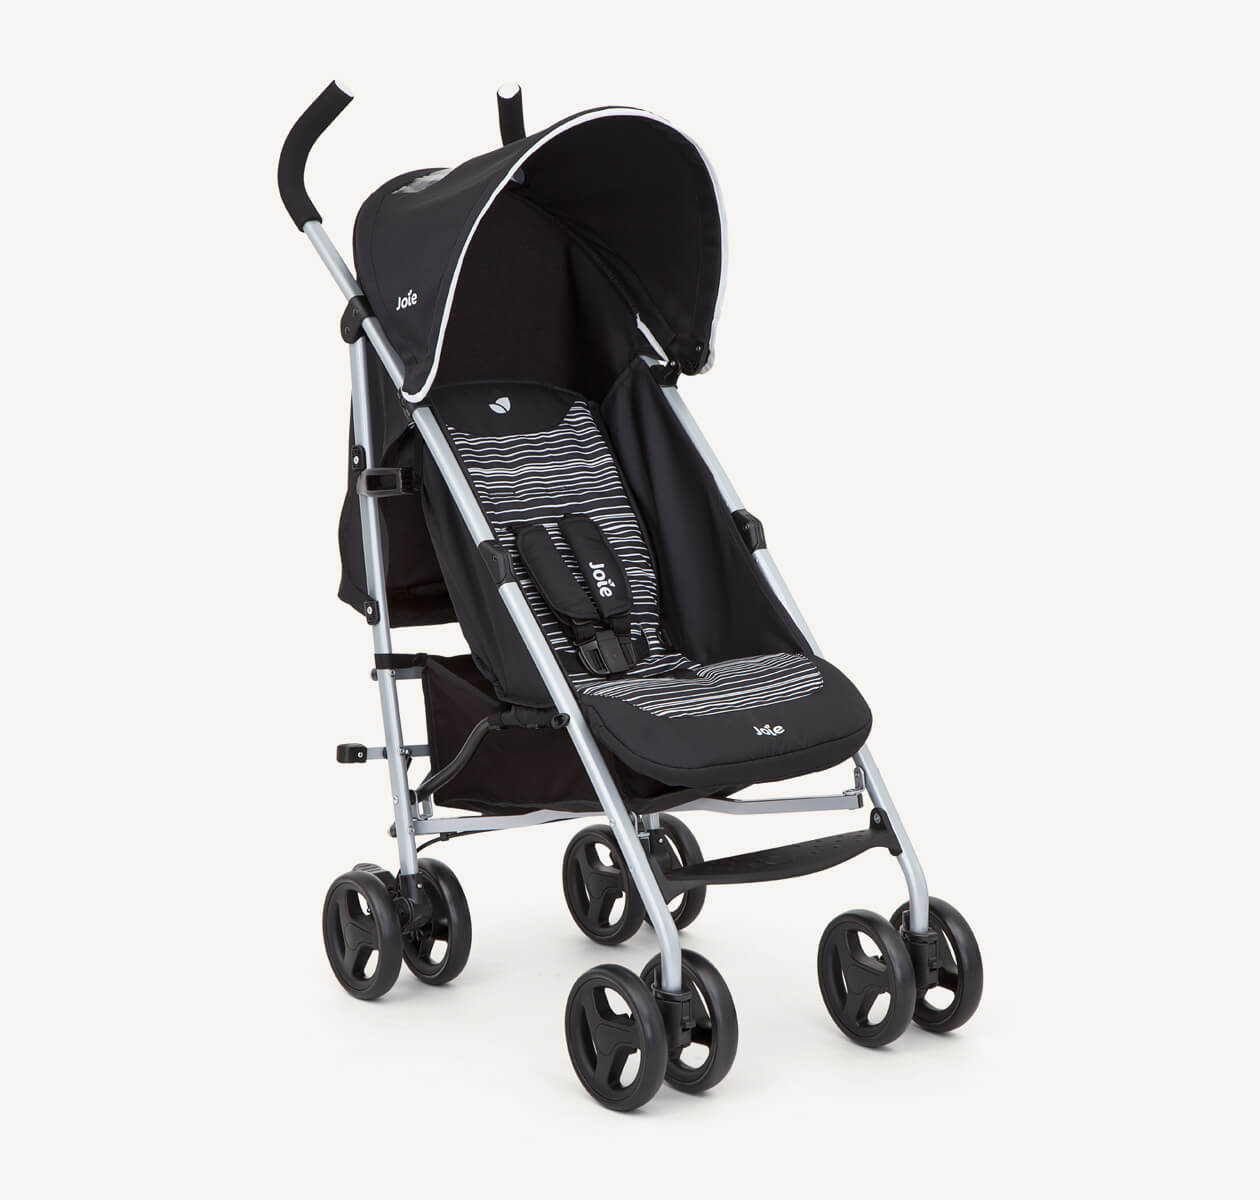 Joie black and white rapid stroller positioned at a right angle.